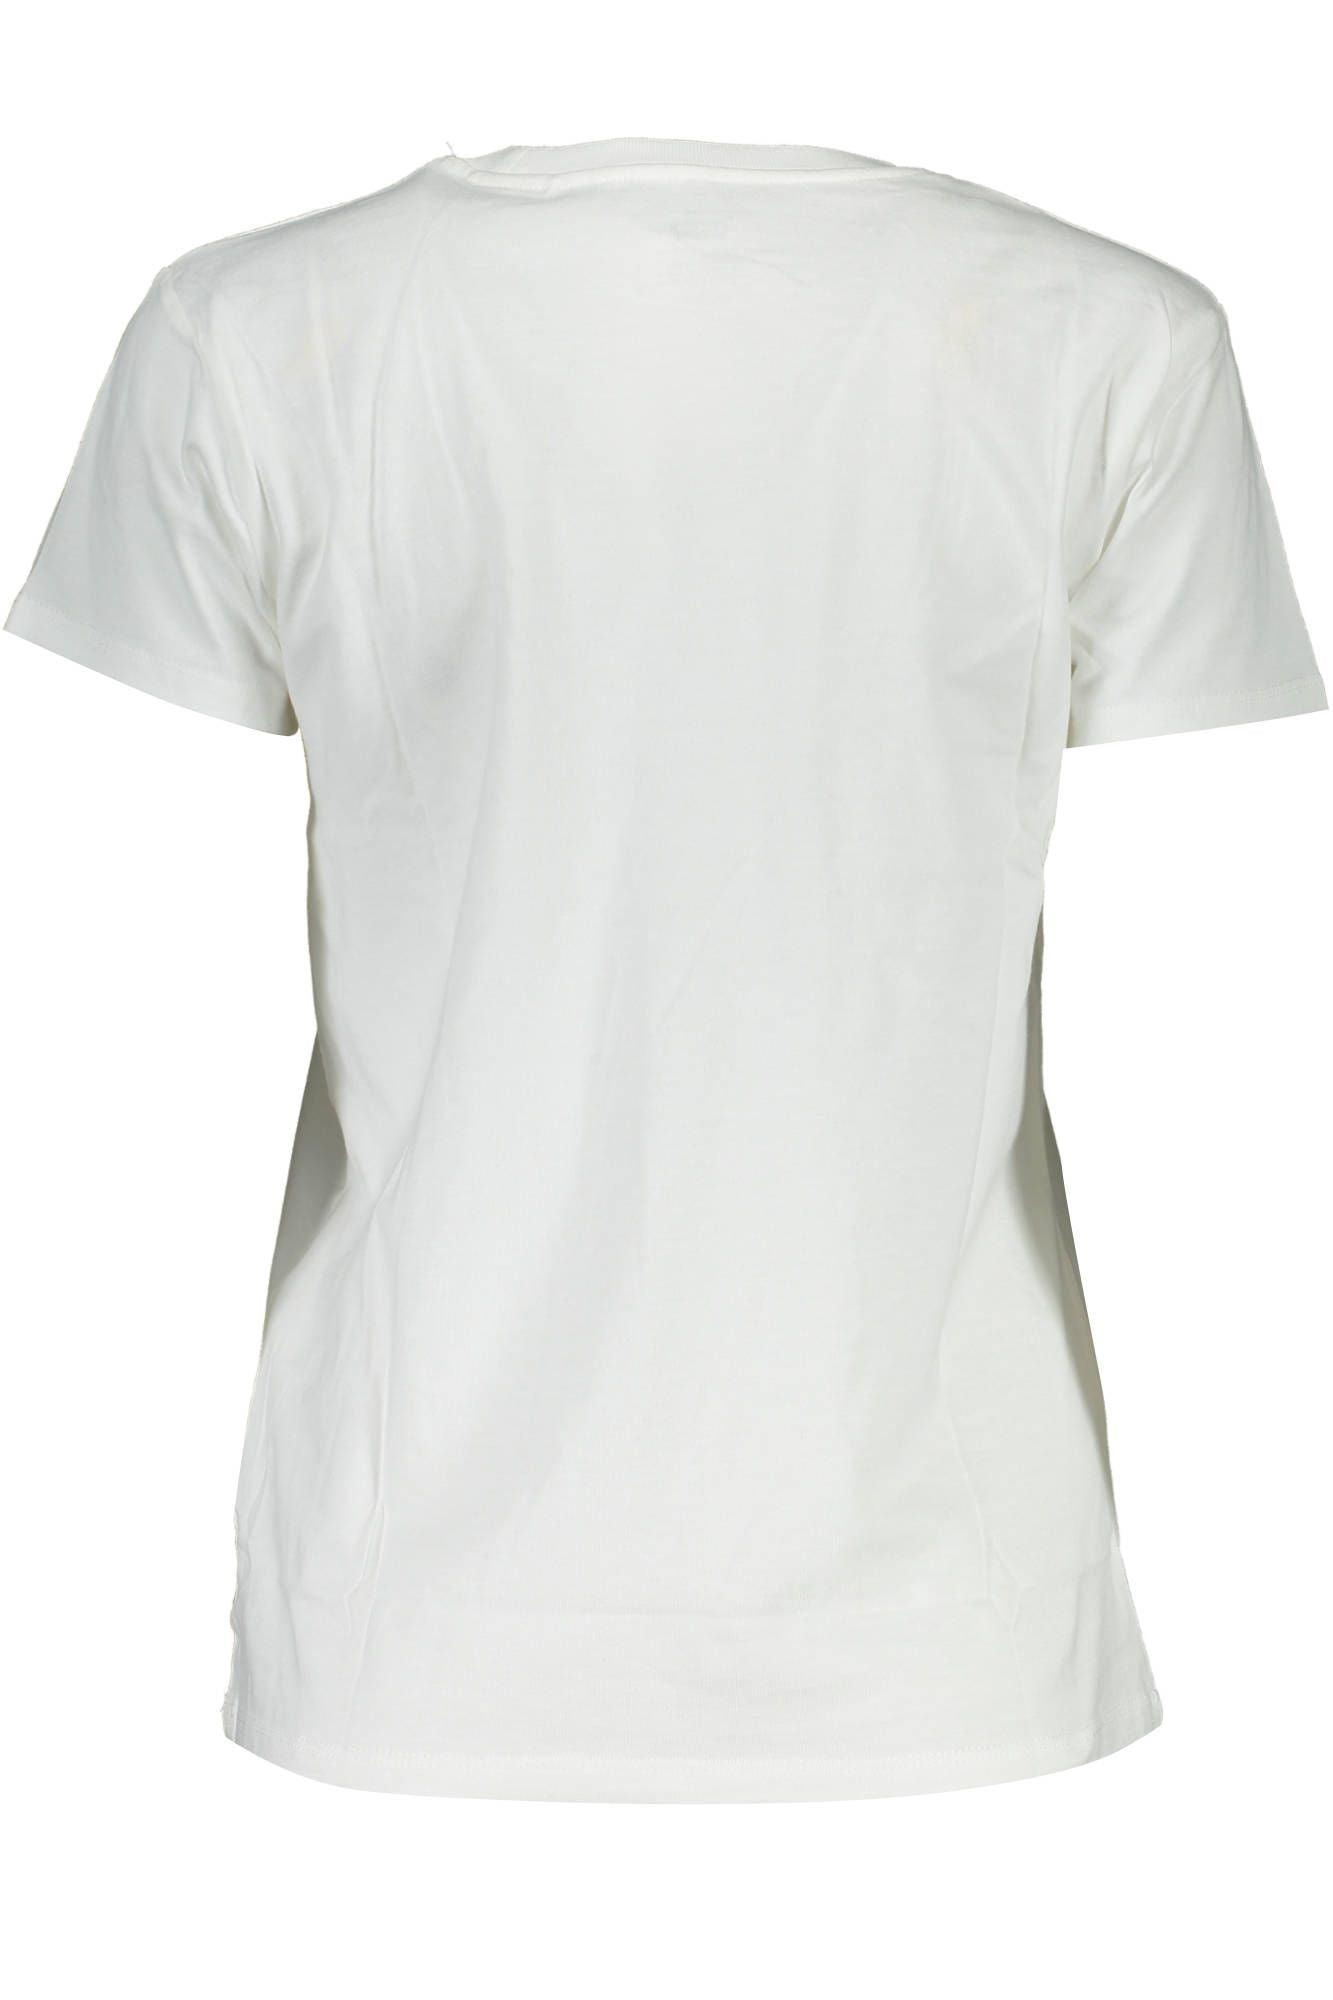 Levi's Chic White Cotton Tee with Iconic Print - PER.FASHION